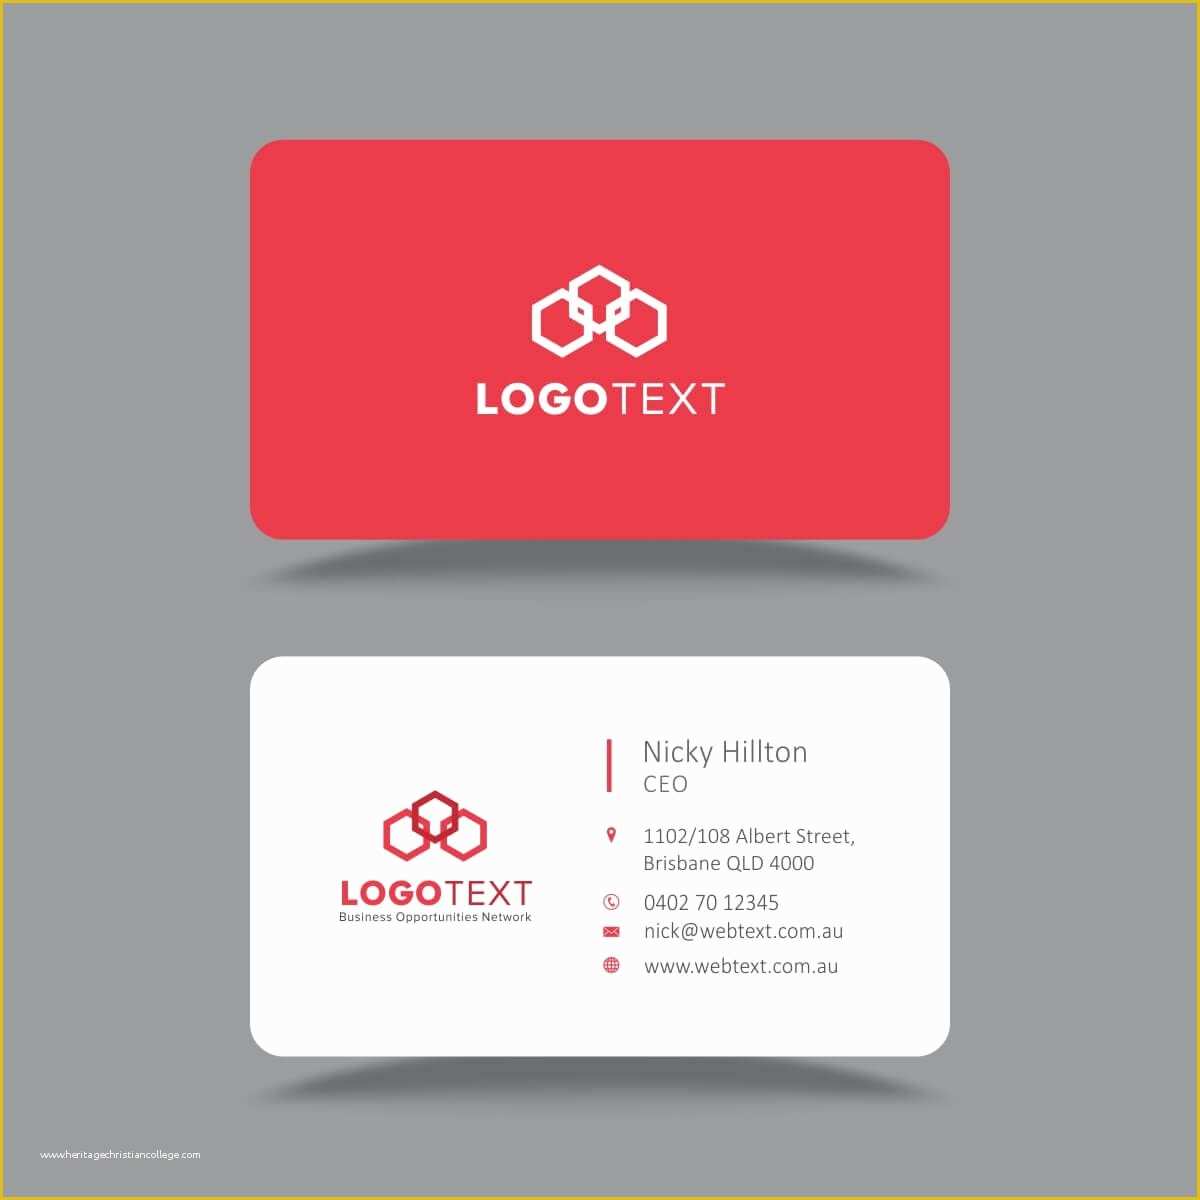 Free Business Card Design Templates Of Networking Business Card Template Business Card Design